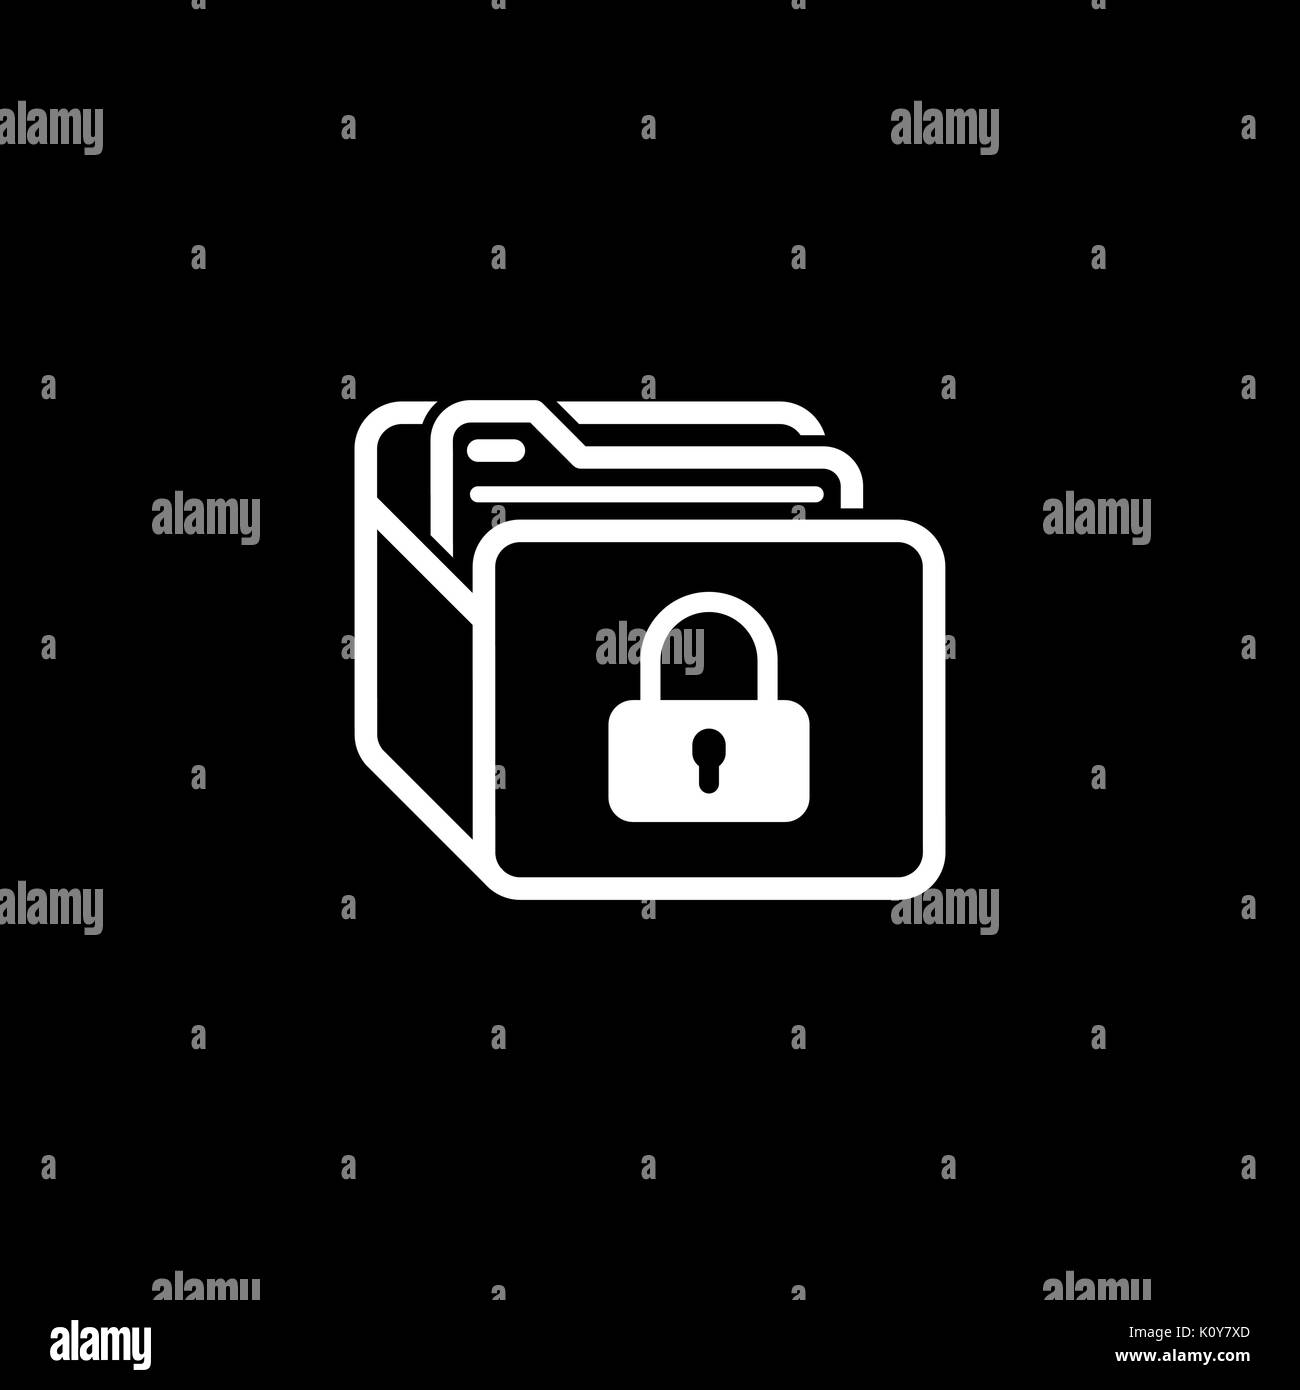 Database Security Icon. Flat Design. Stock Vector